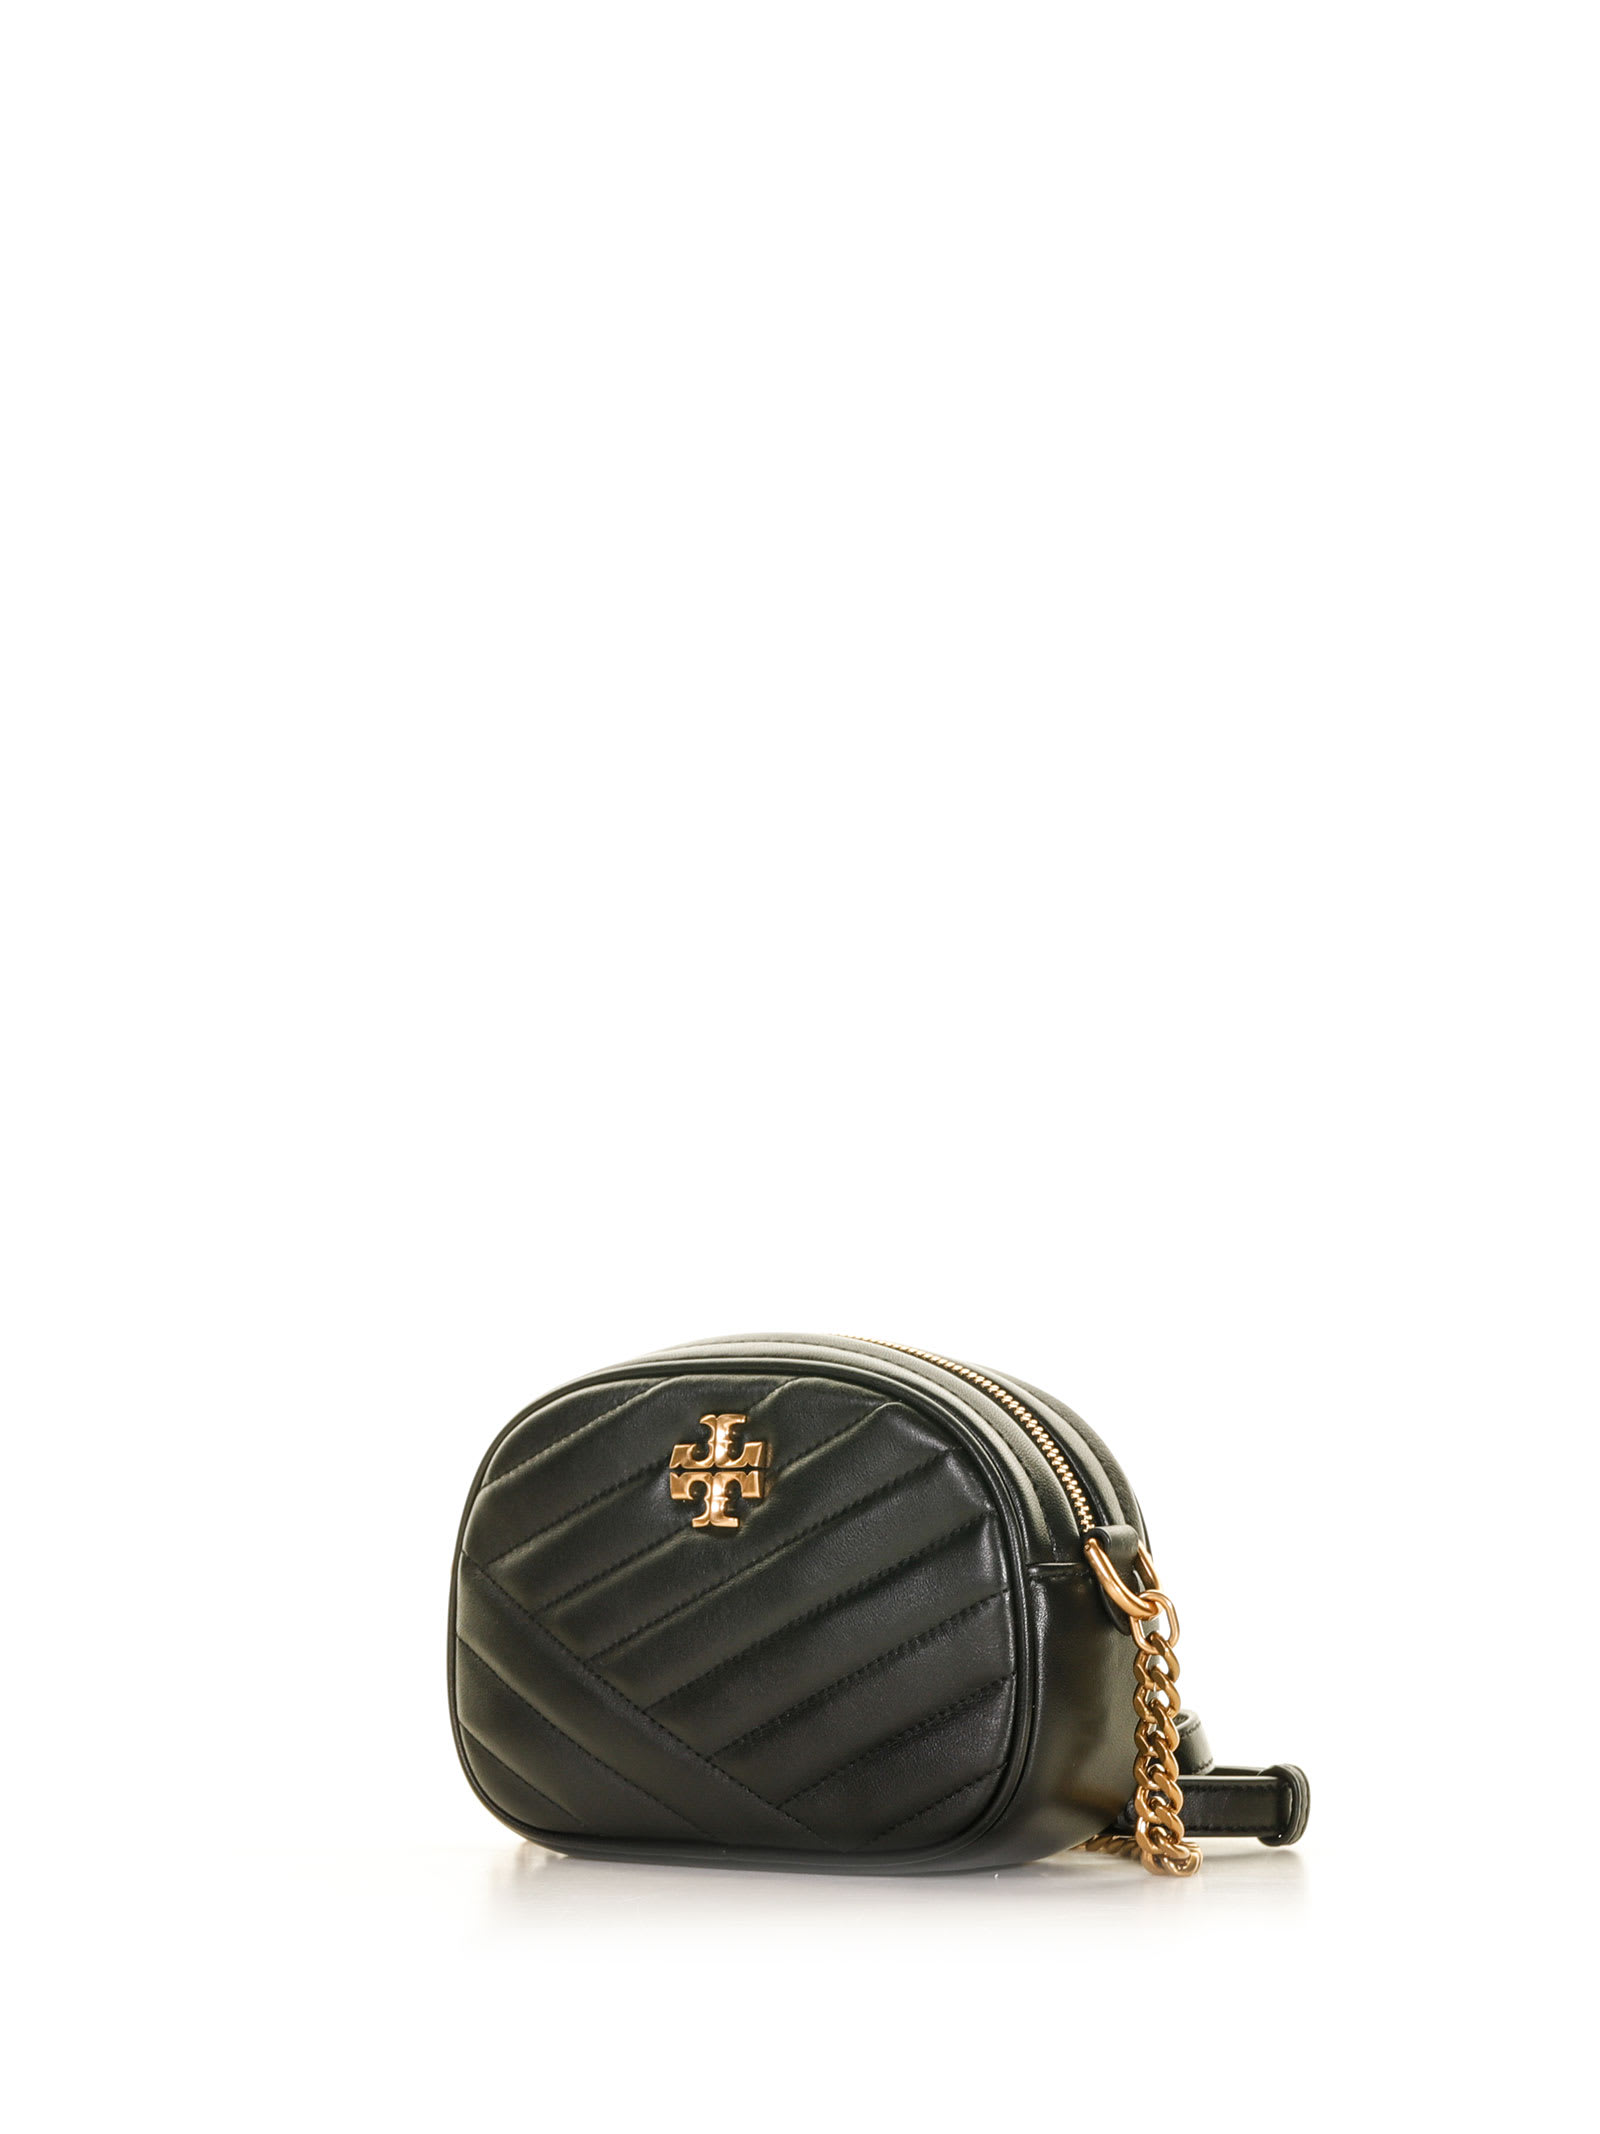 The Kira Handbag Has Arrived At Tory Burch - The Bellevue Collection